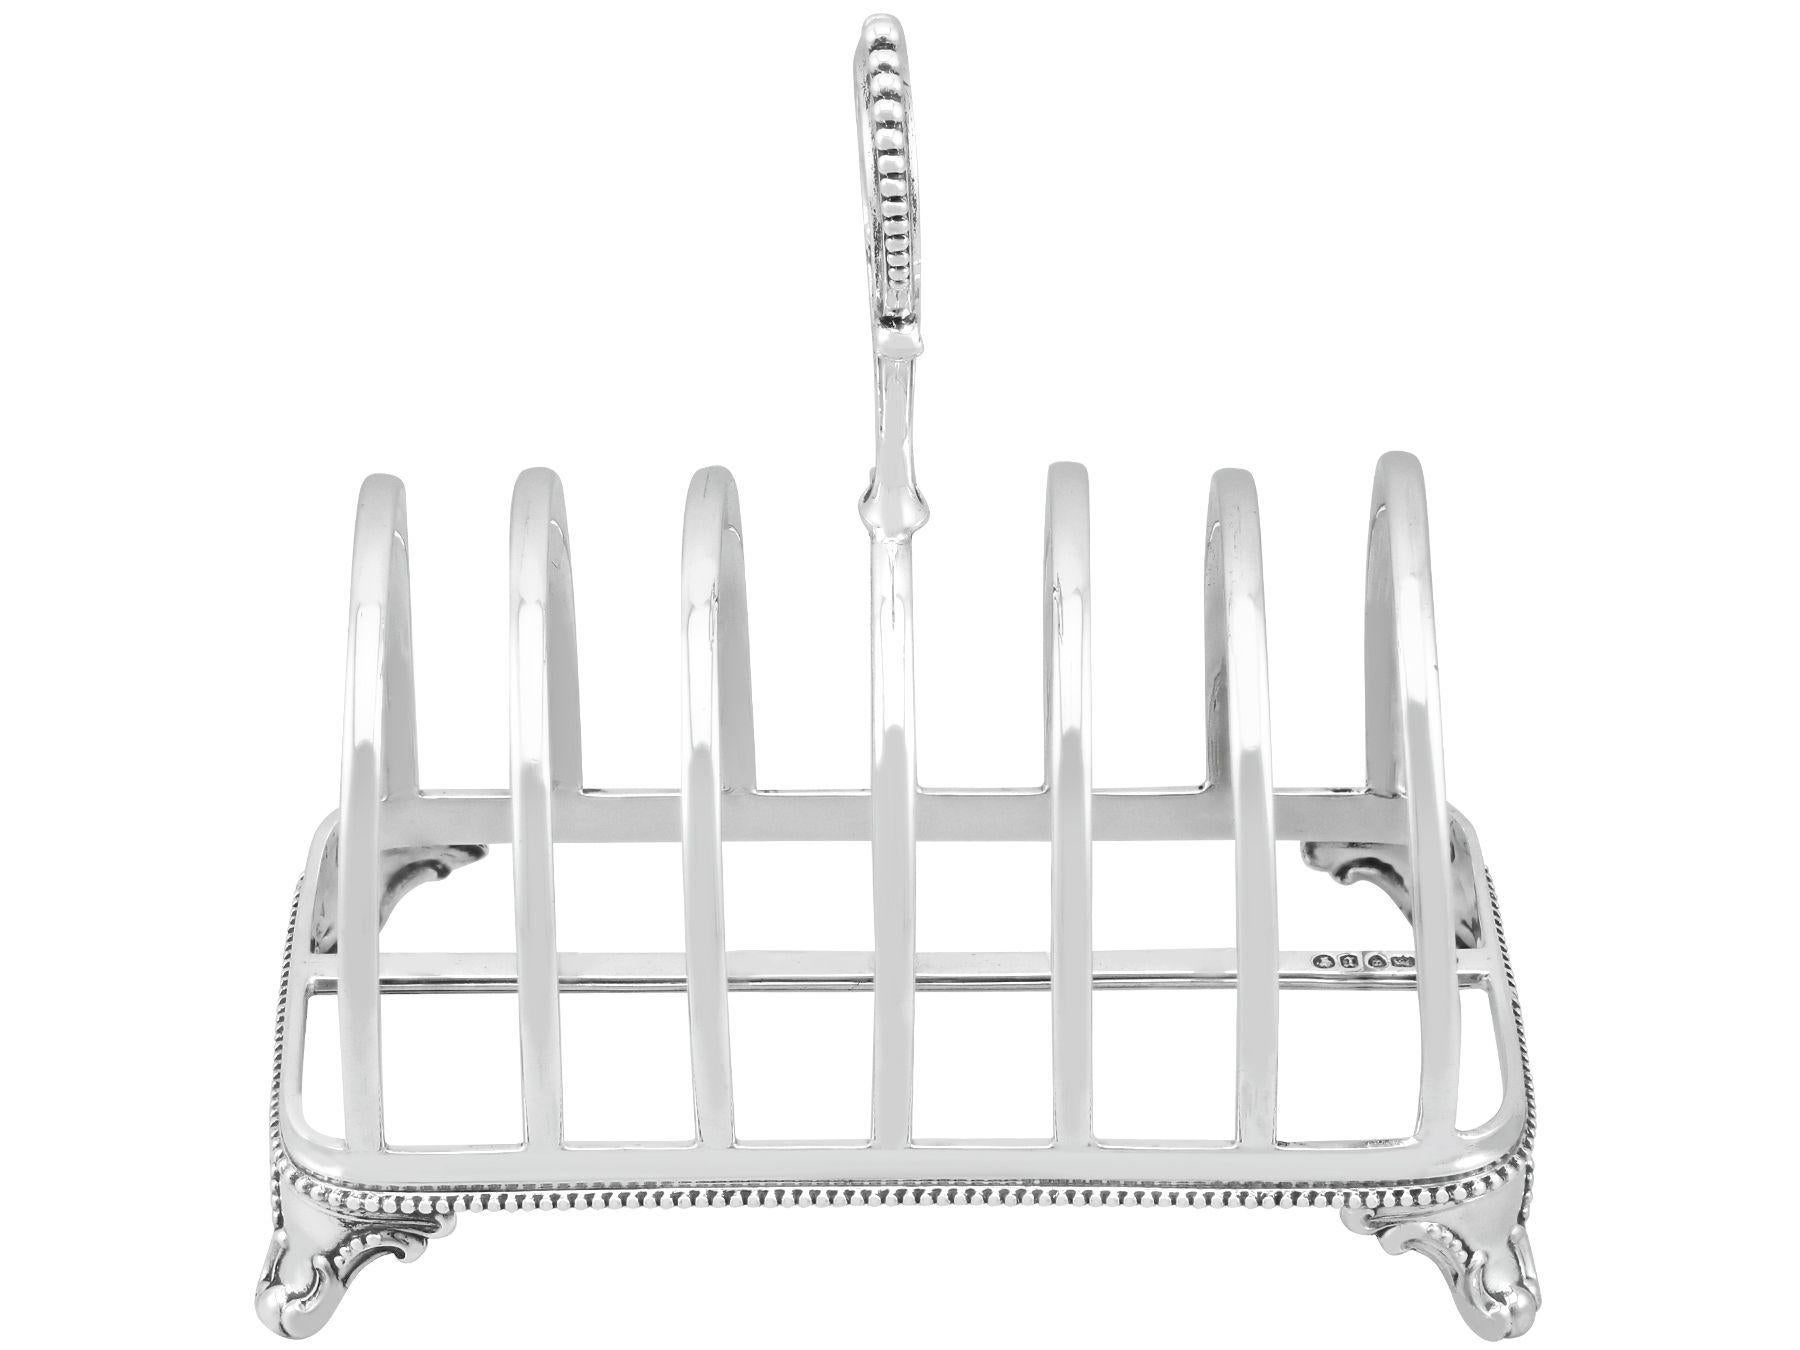 An exceptional, fine and impressive antique Victorian English sterling silver toast/letter rack; an addition to our dining silverware collection

This exceptional antique Victorian silver toast rack, in sterling standard, has a plain rounded